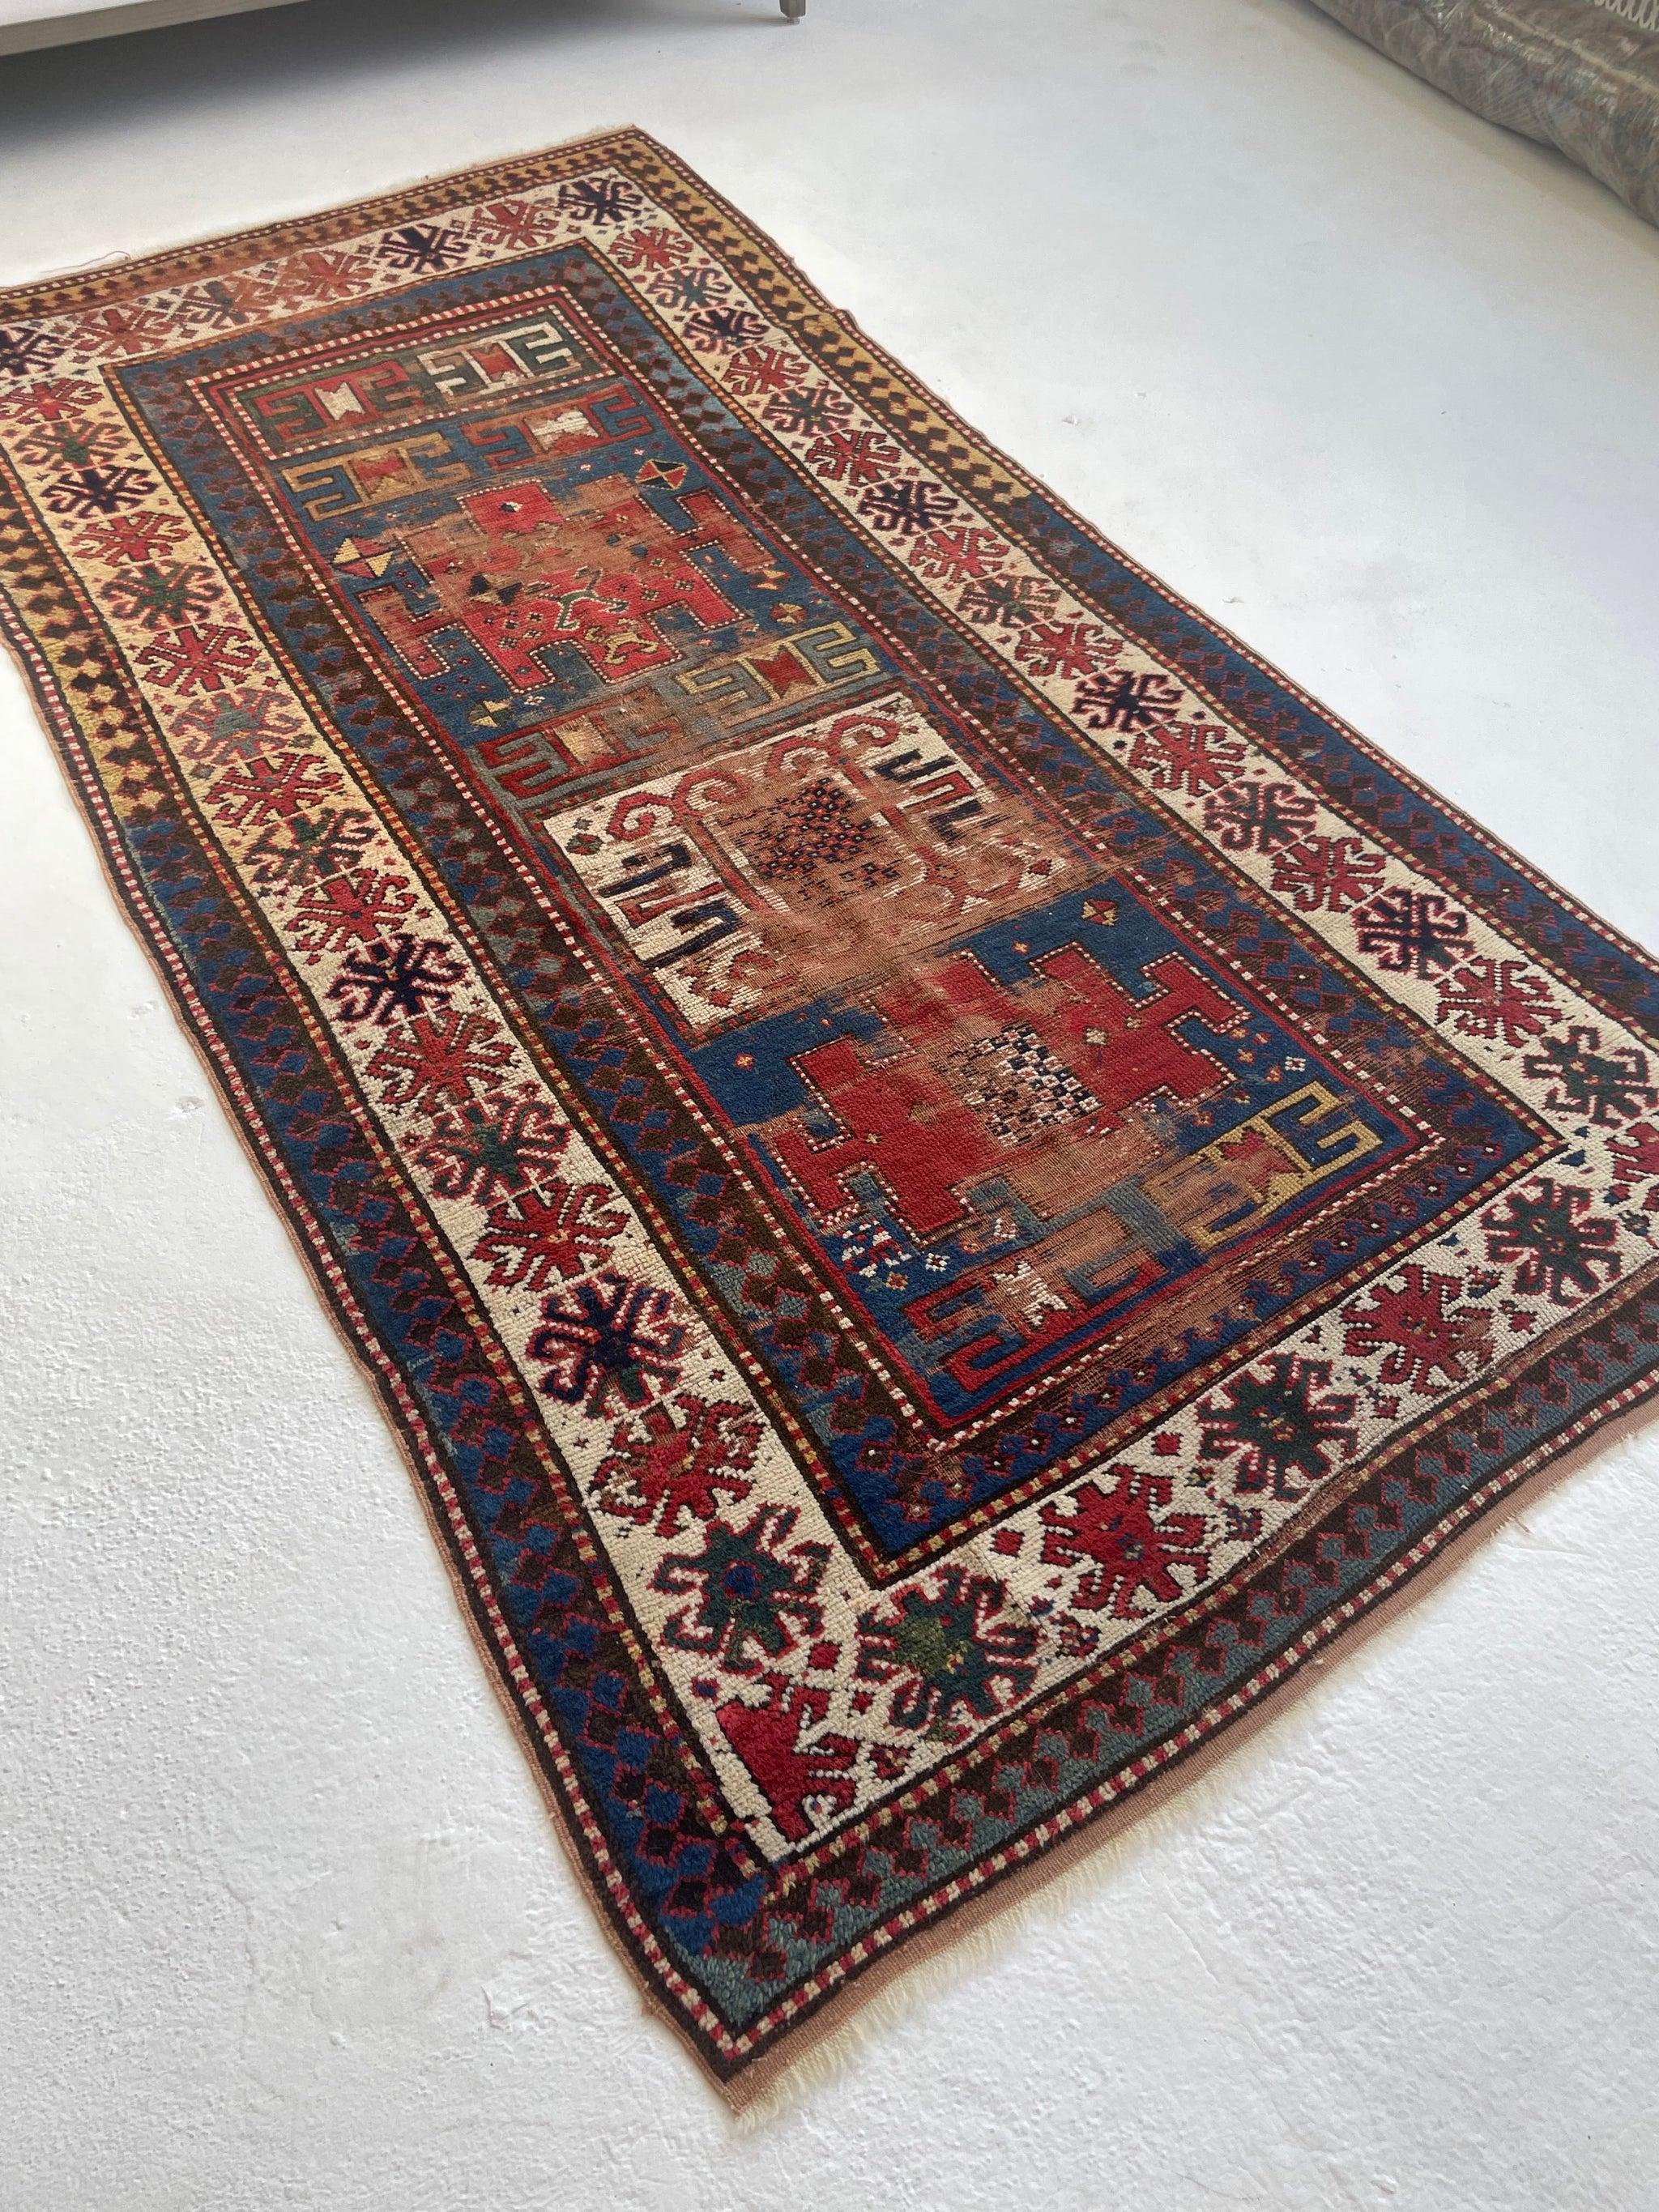 20th Century Antique Kazak Rug with Iconic Fence of Protection Perimeter, c. 1920-30's For Sale